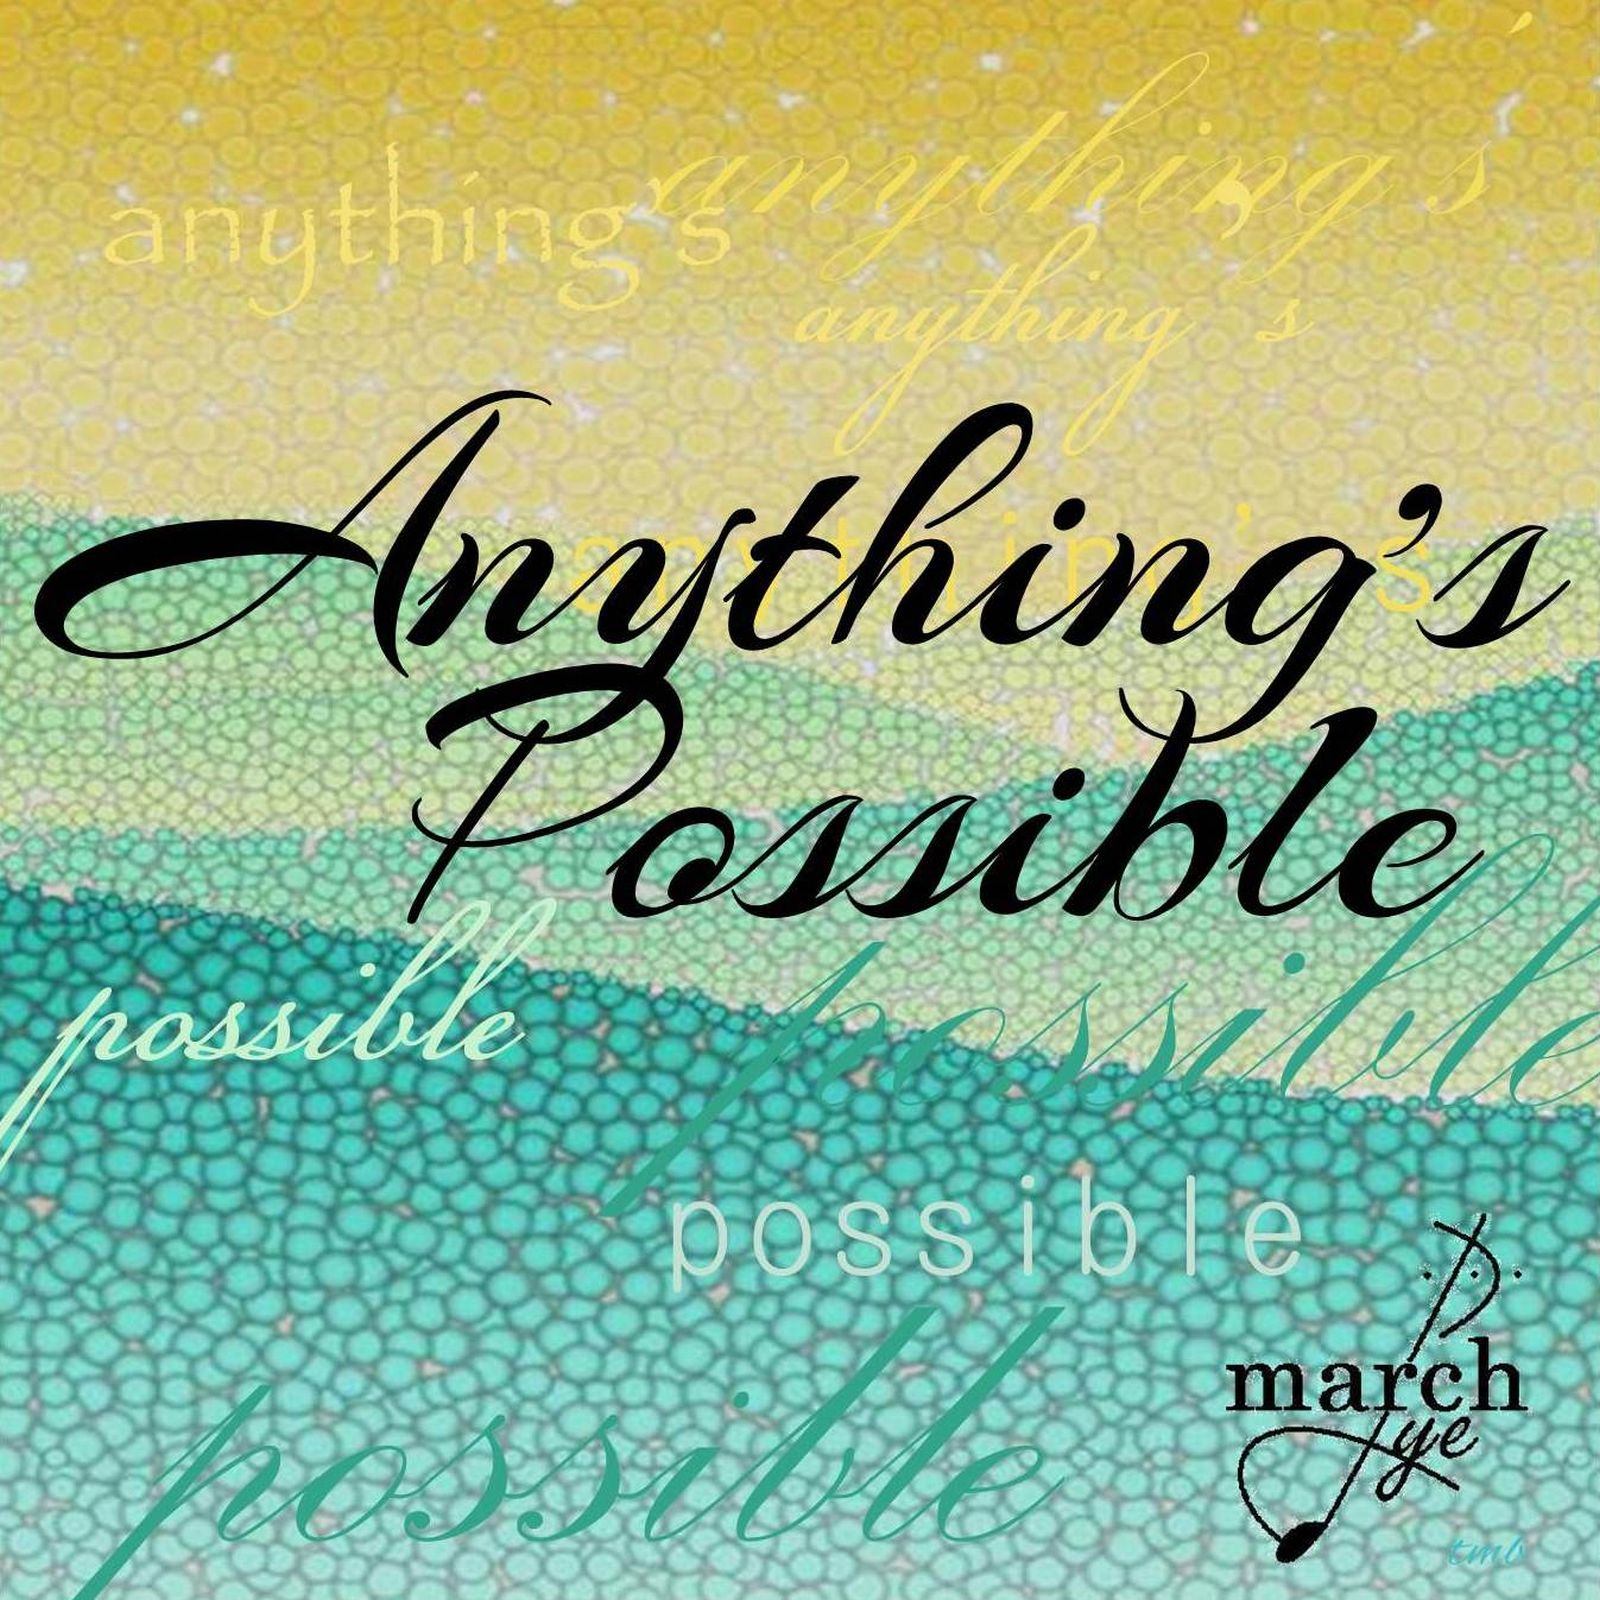 anythings-possible-1600-x-1600-300-dpi